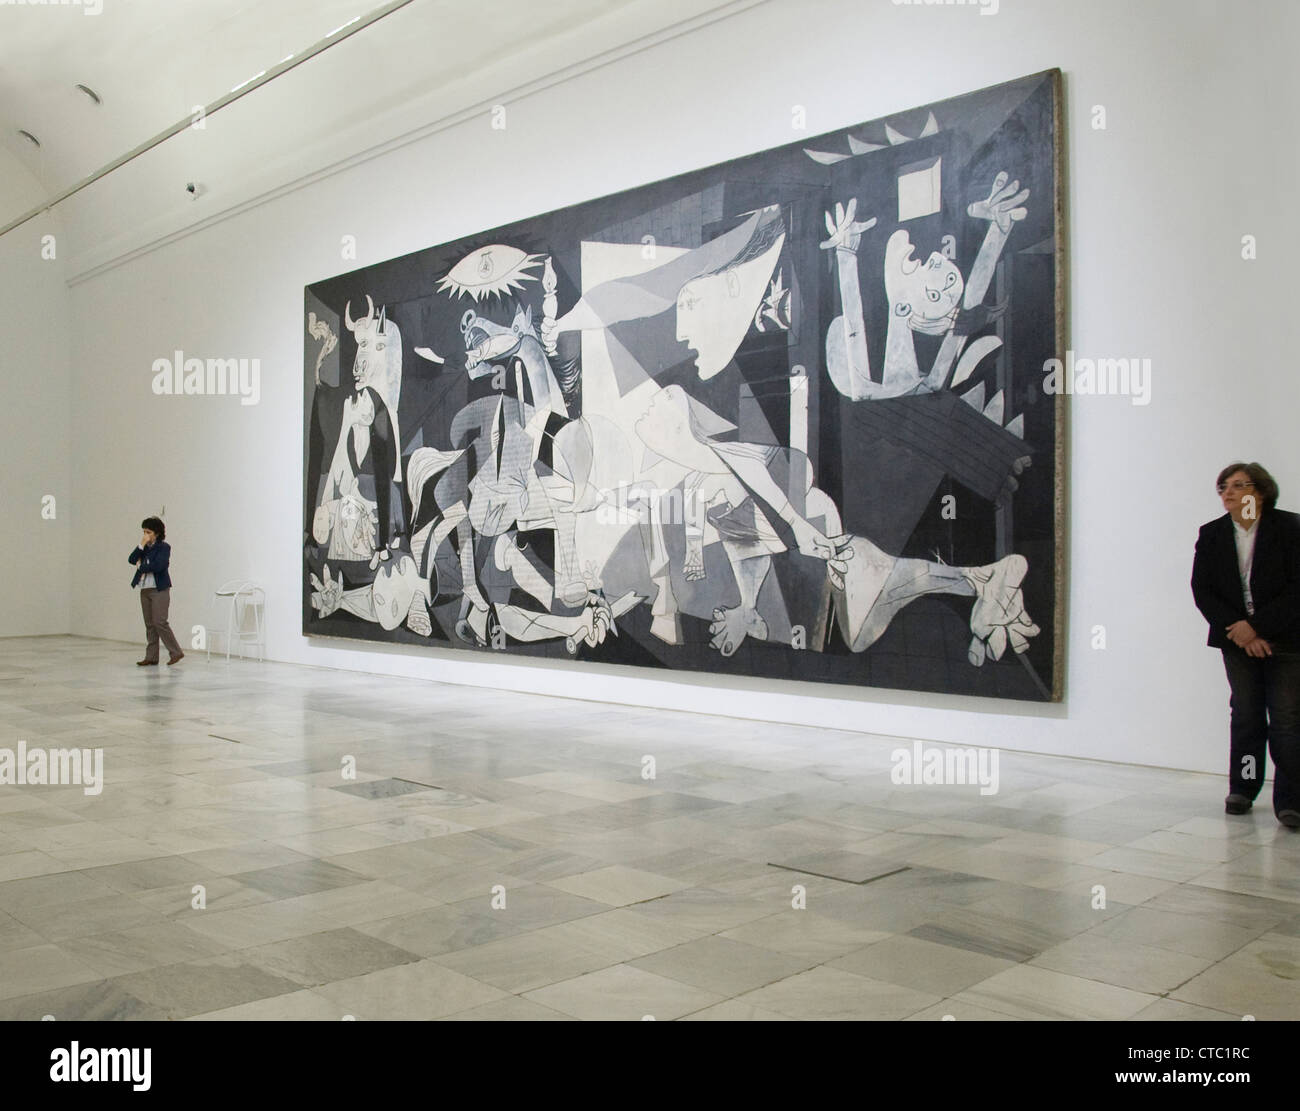 Anti war painting Guernica by Pablo Picasso hanging at the Museo Nacional Centro de Arte Reina Sofía in Madrid Spain Stock Photo